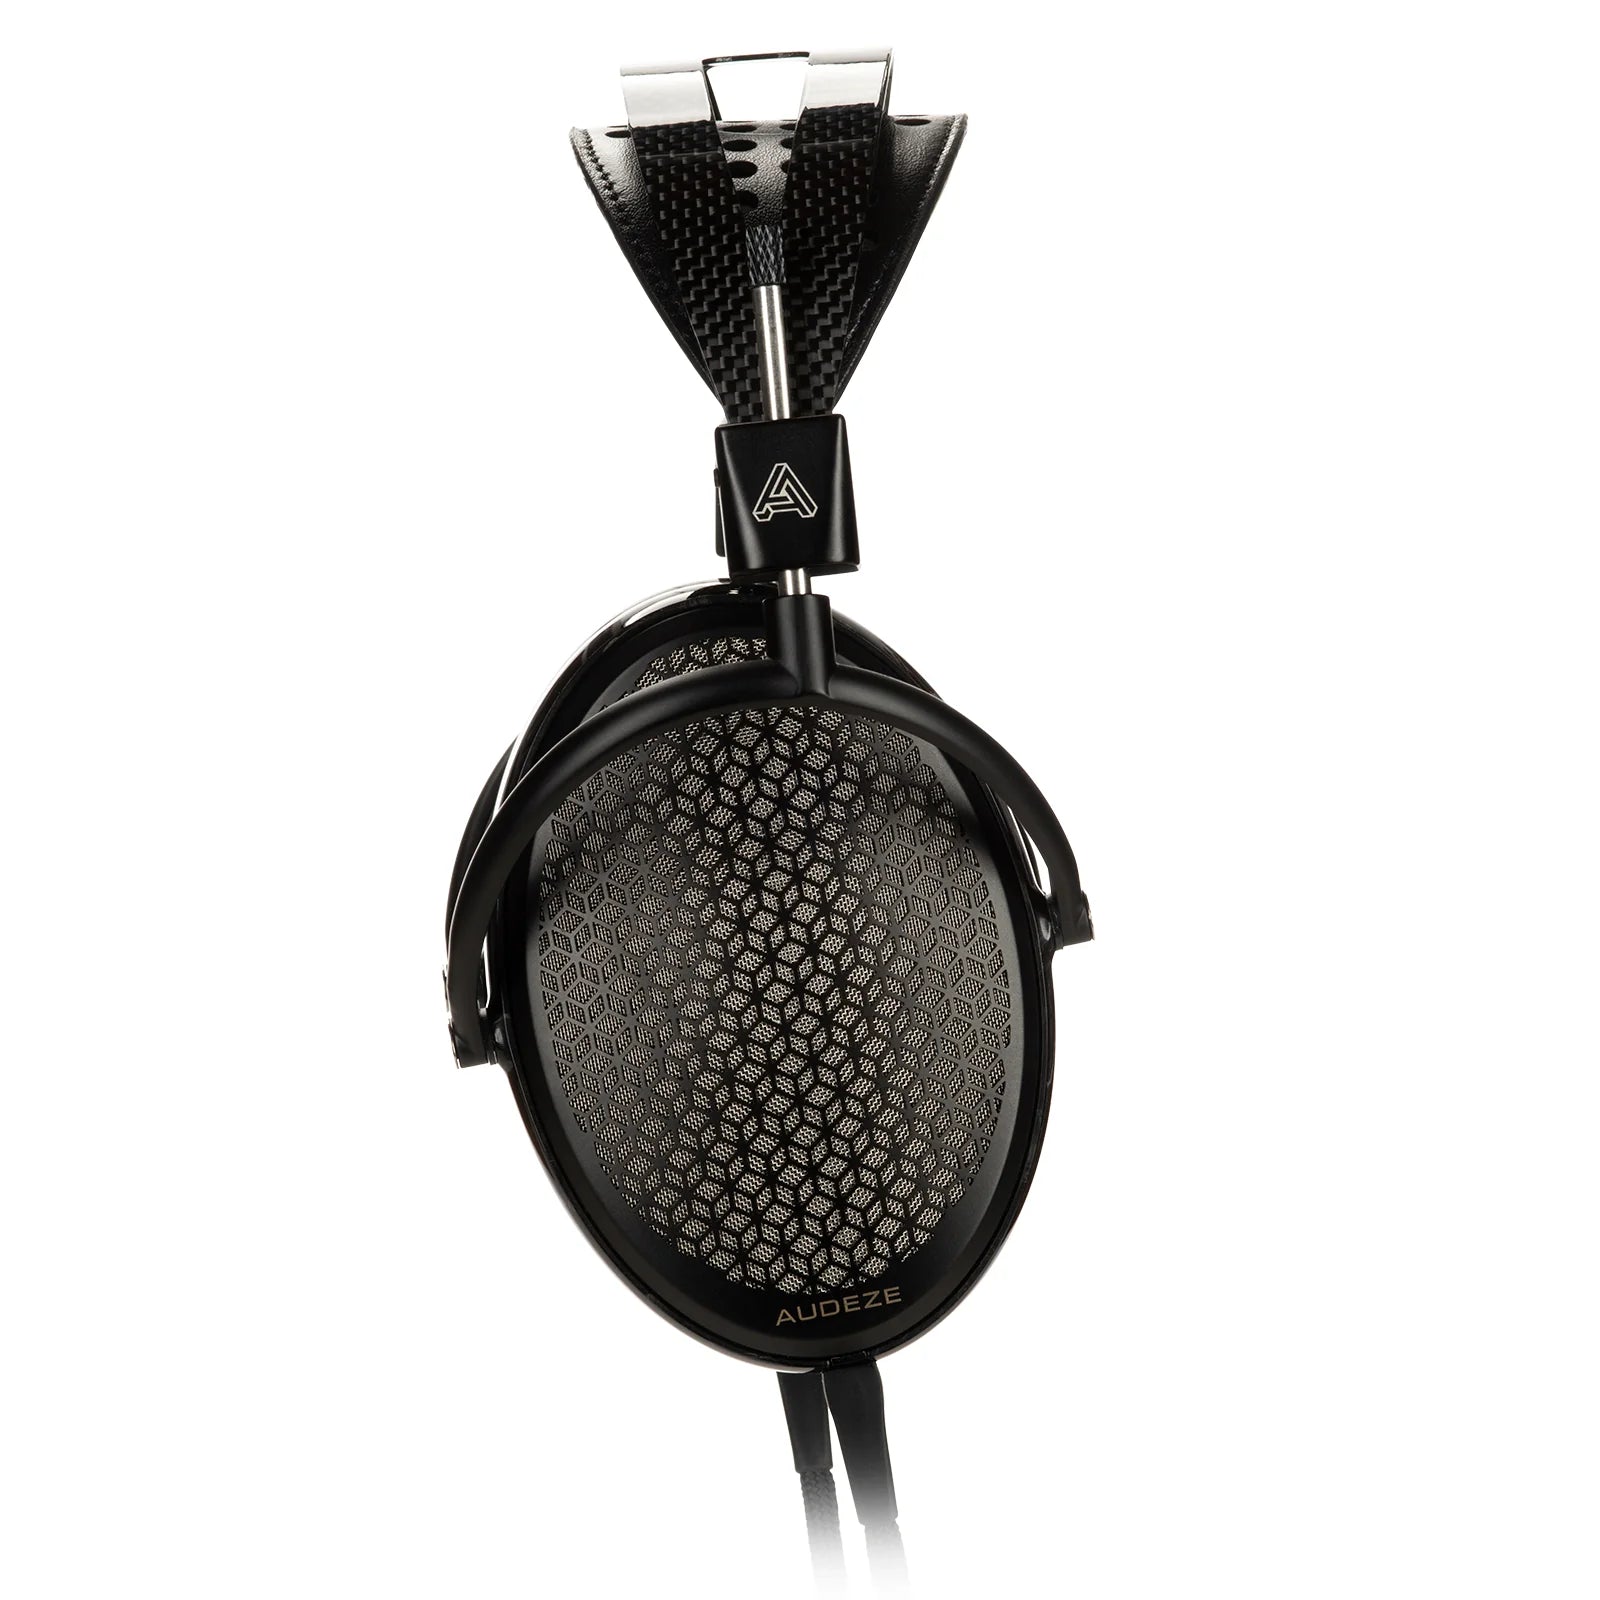 Audeze CRBN EXL Headphones (Check With Us For Inventory)